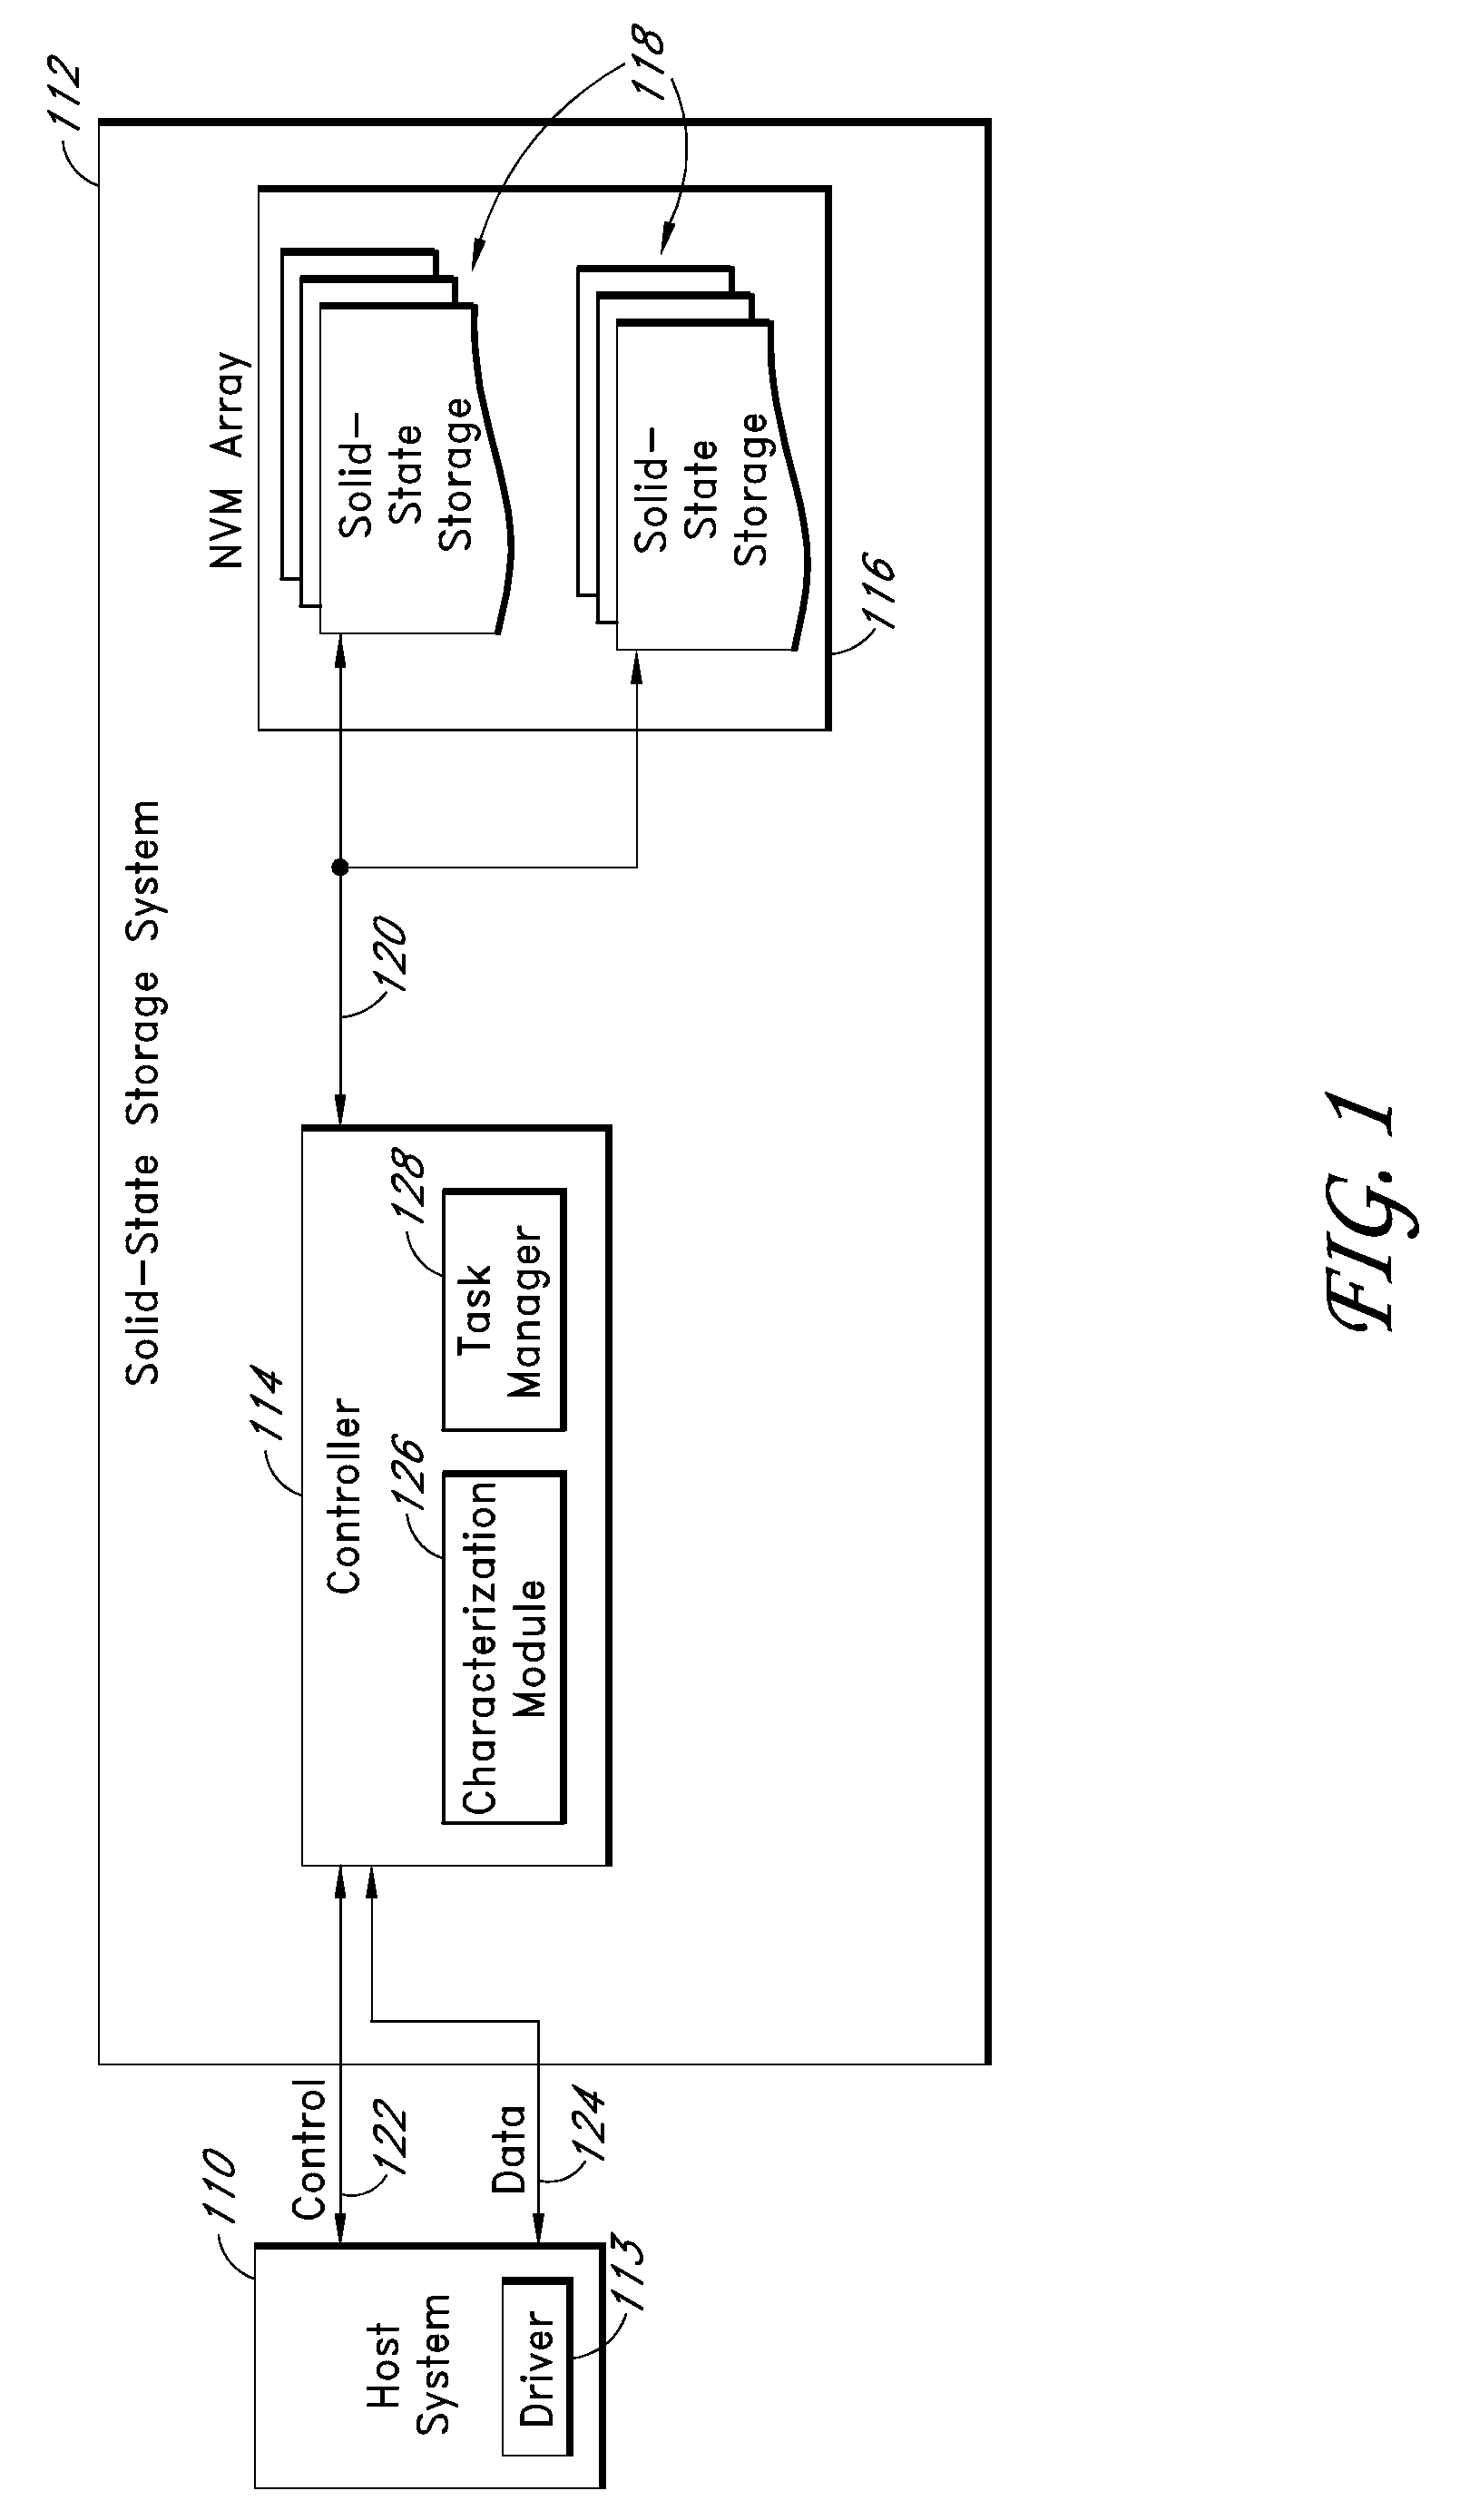 Systems and methods for improving the performance of non-volatile memory operations